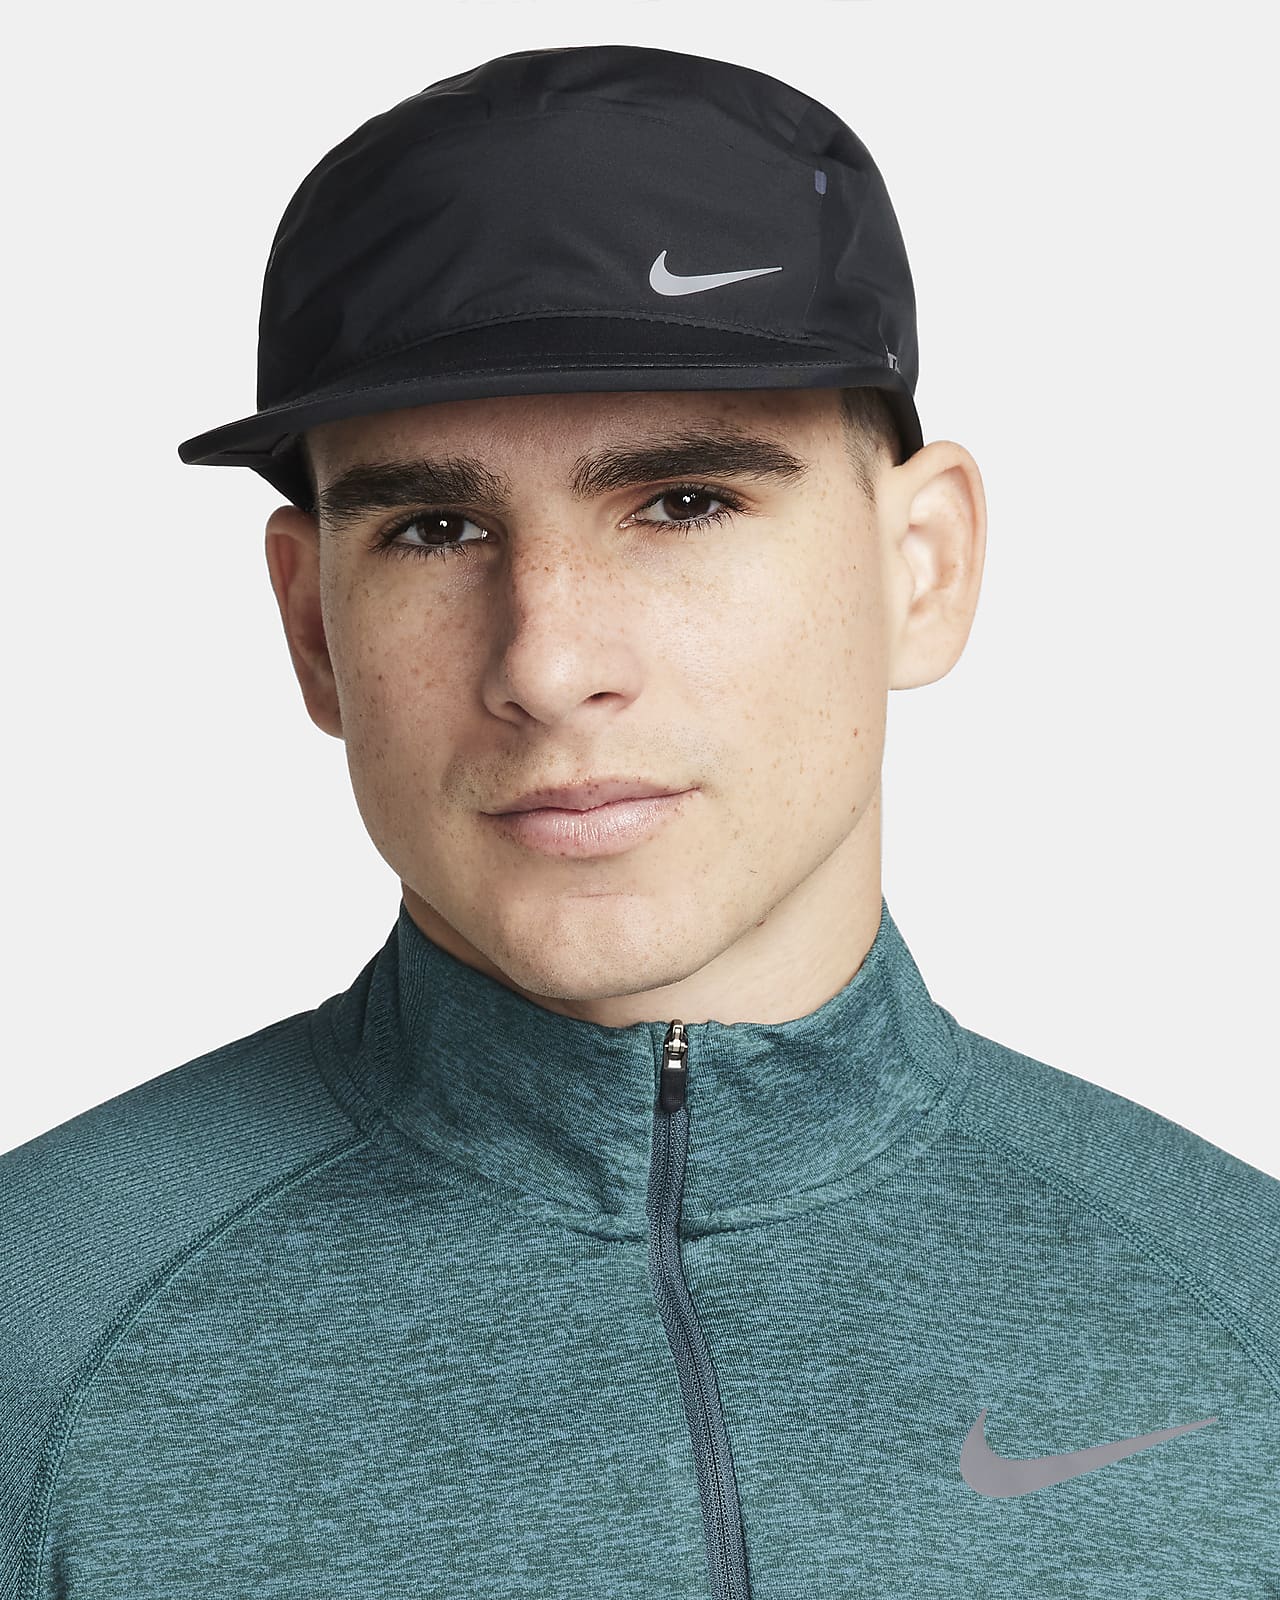 Nike Storm-FIT ADV Fly AeroBill Cap. Unstructured